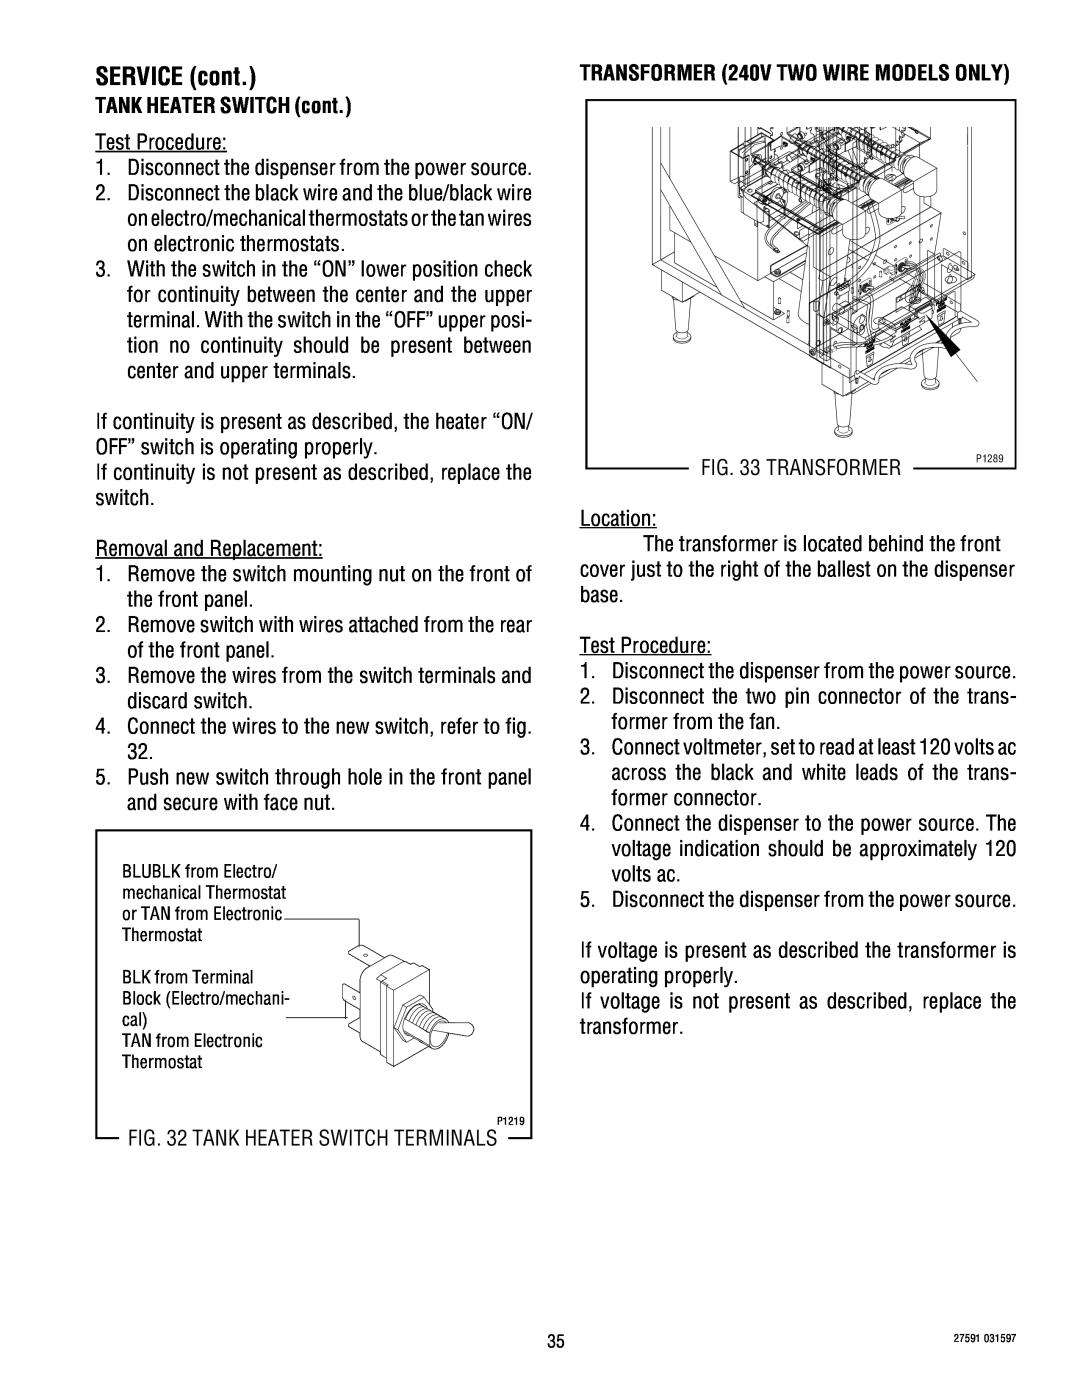 Bunn HC-3 service manual TANK HEATER SWITCH cont, SERVICE cont, TRANSFORMER 240V TWO WIRE MODELS ONLY 